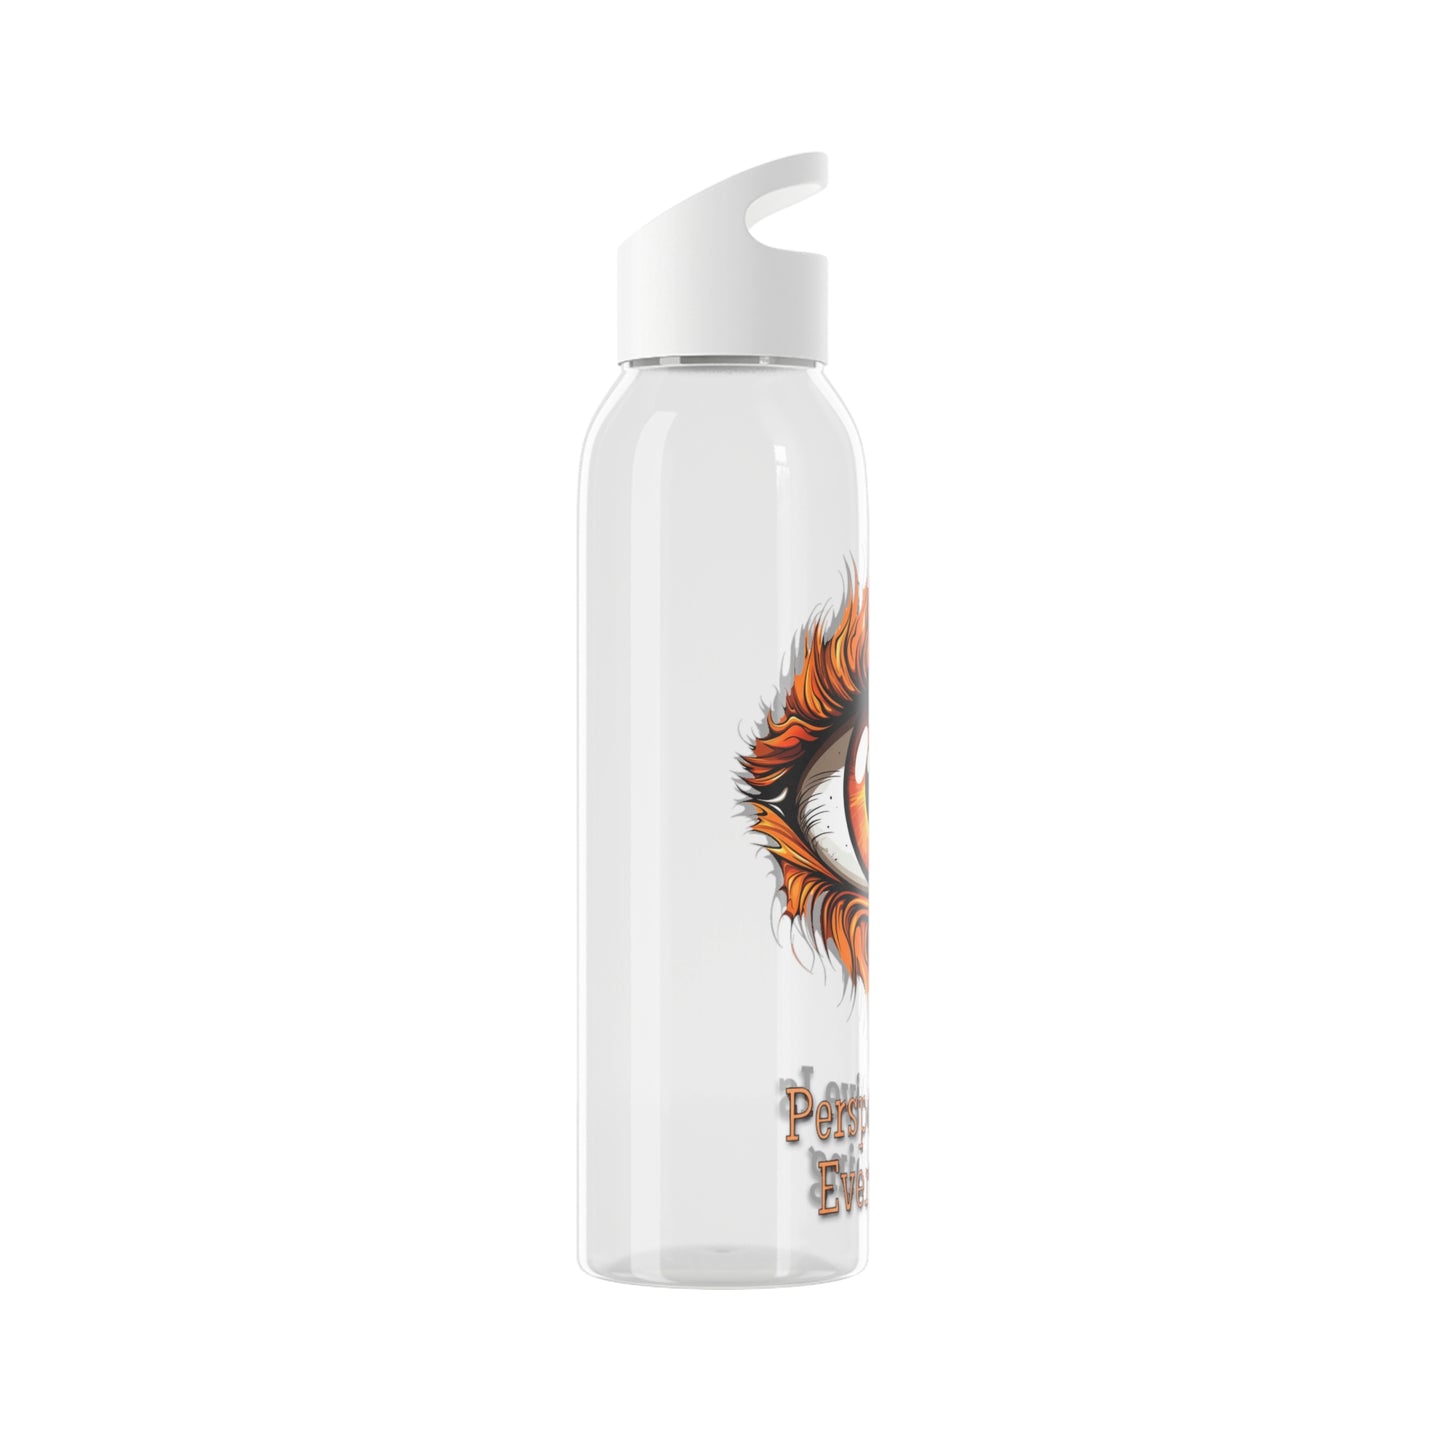 Perspective is Everything: Orange | Sky Water Bottle